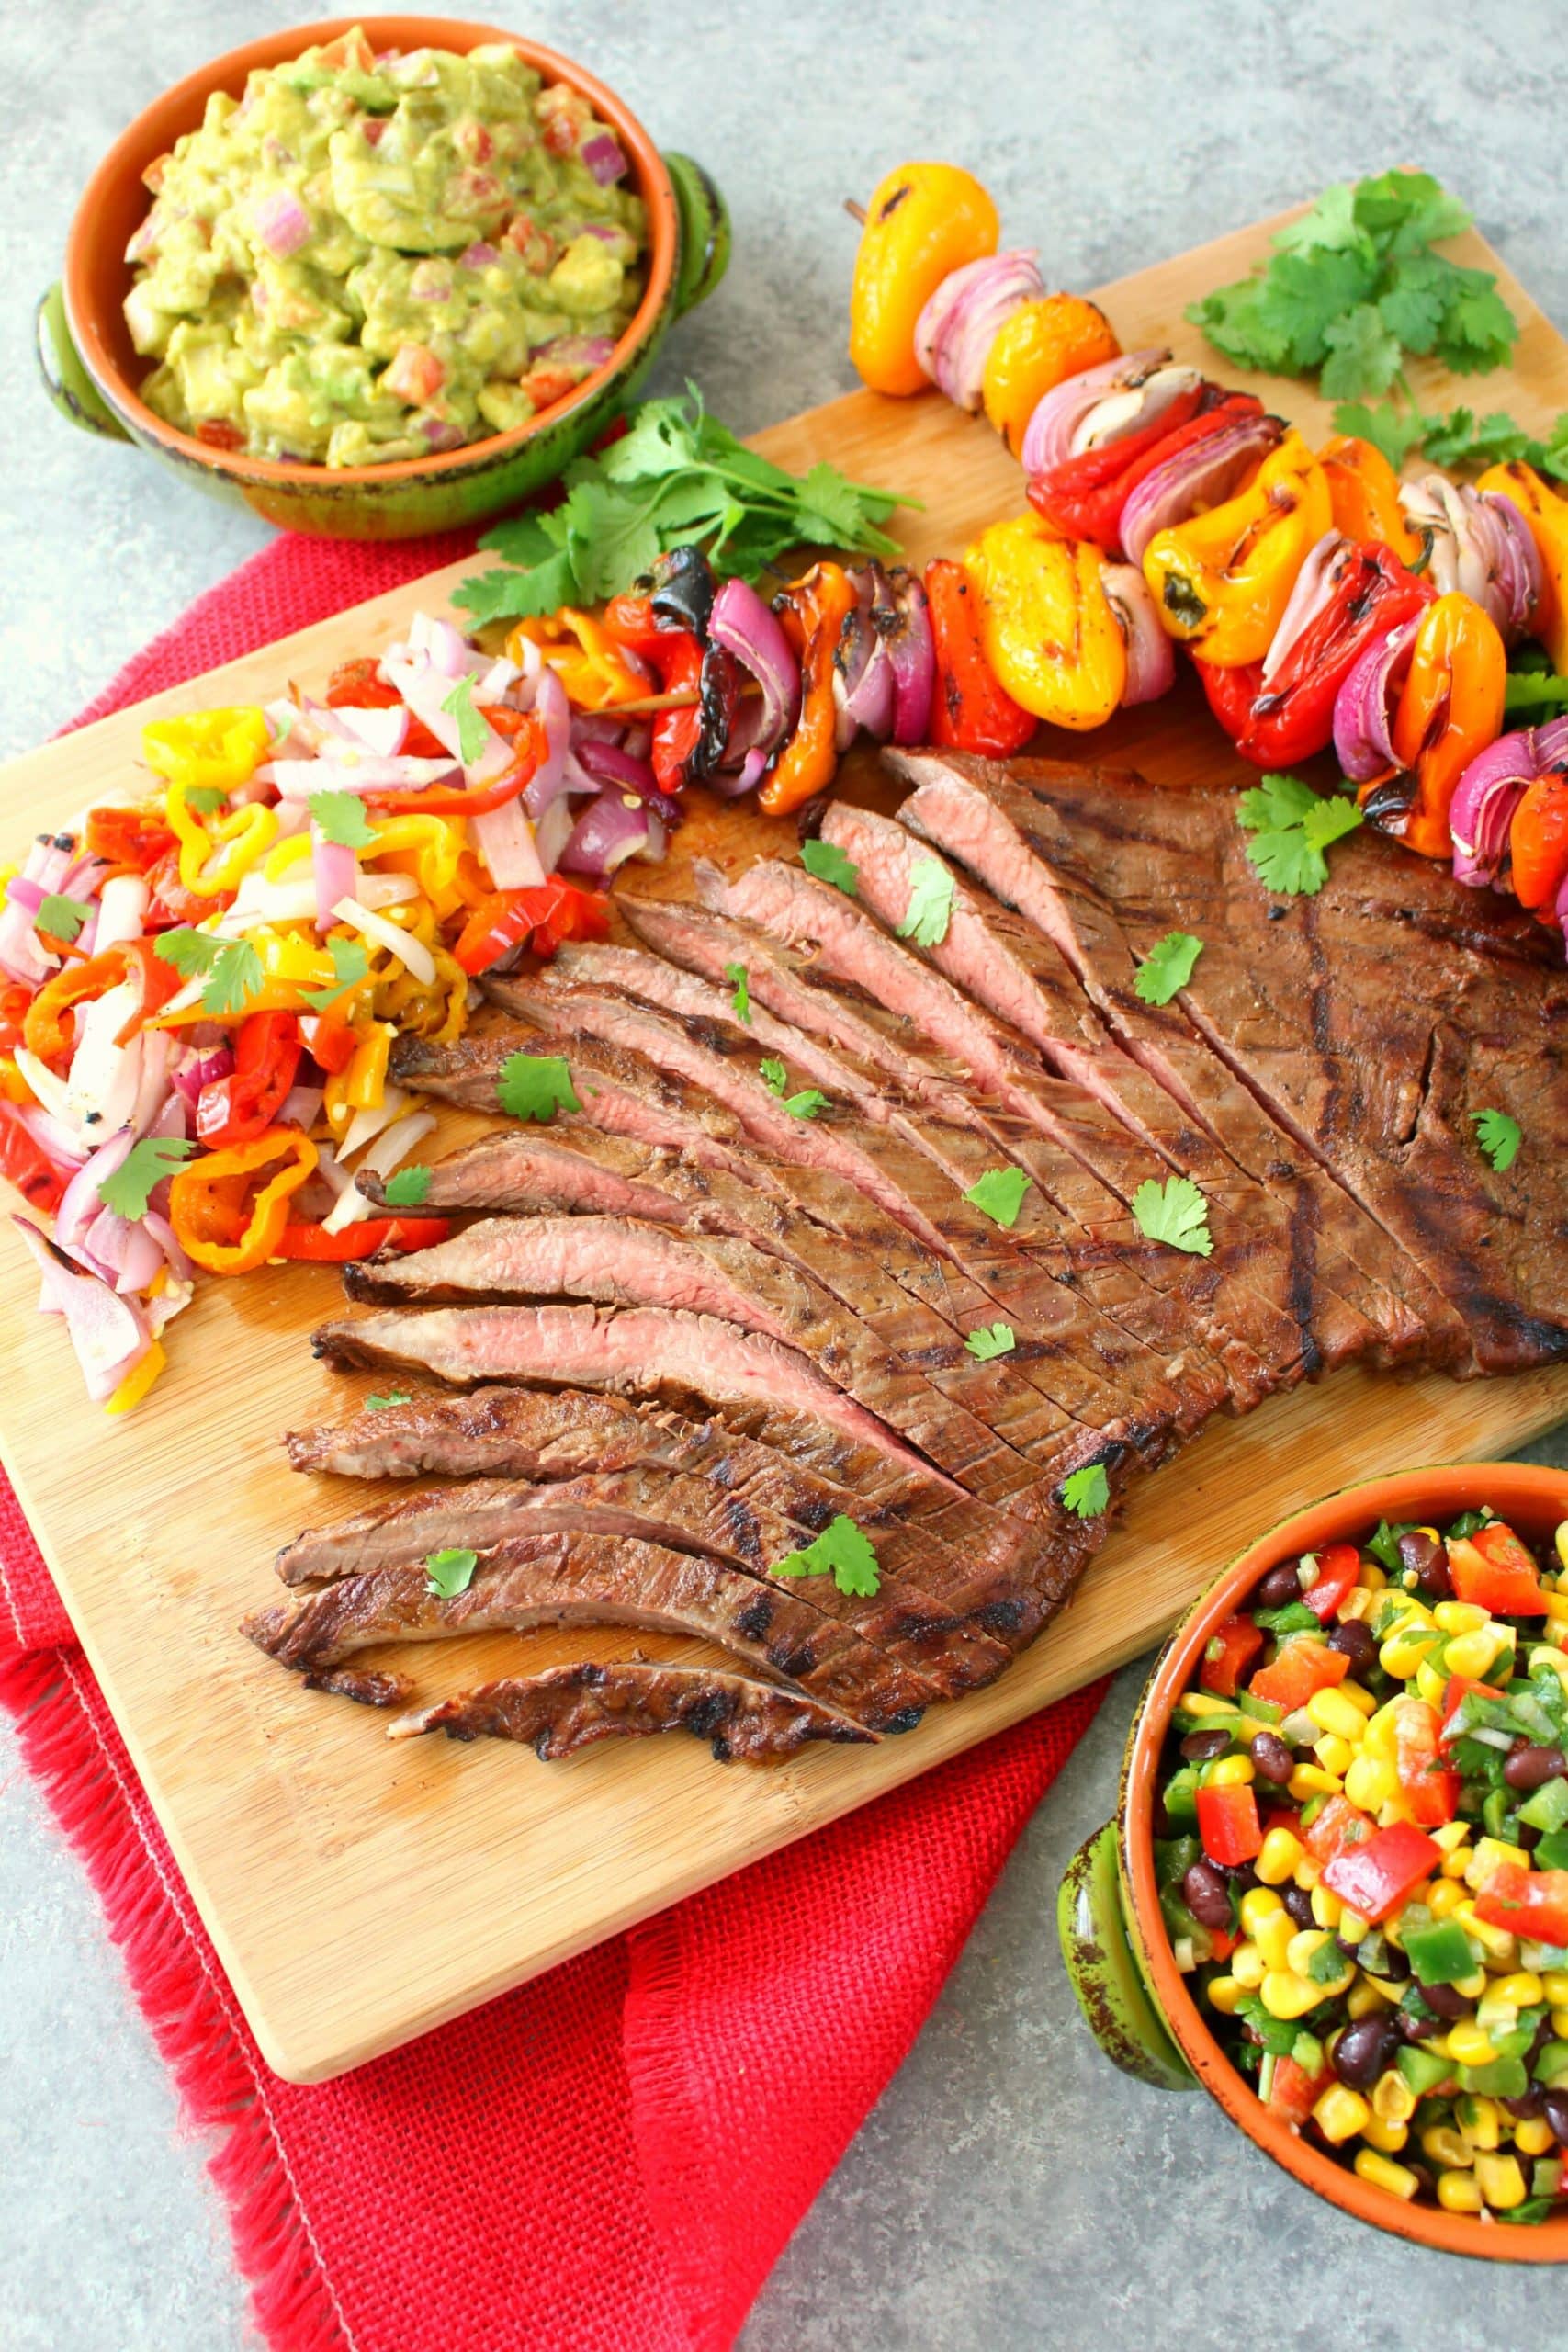 Get restaurant quality fajitas right at home! These savory Grilled Steak Fajitas will be your new favorite Tex-Mex meal. Made with tender, juicy flank steak and grilled with peppers and onions, this fajita recipe is simple to make and completely delicious!